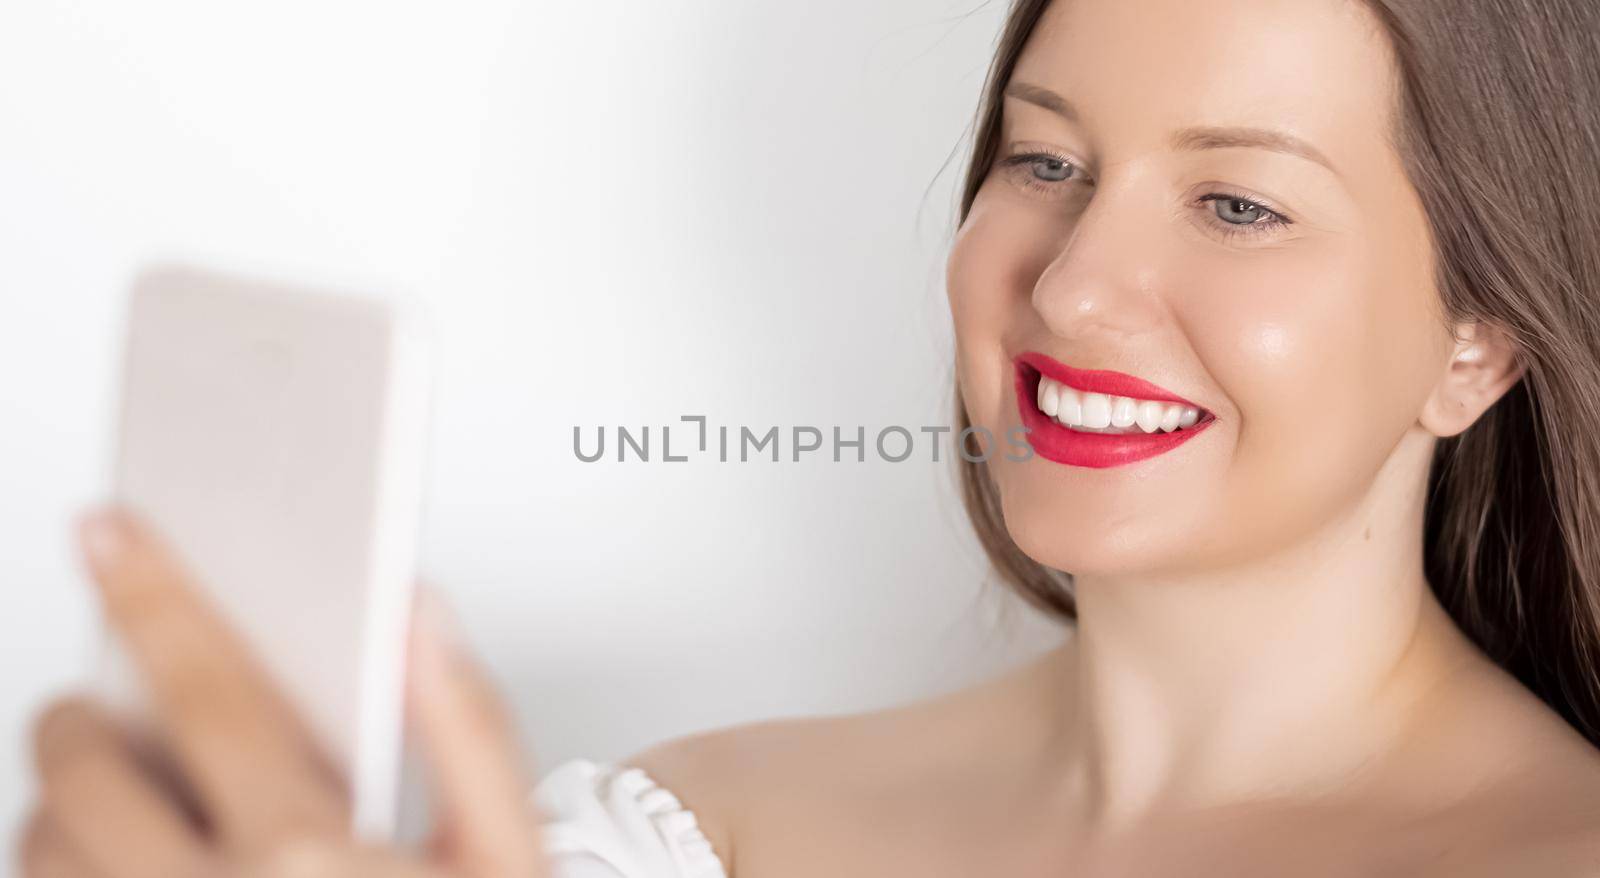 Happy smiling woman with smartphone having video call or taking selfie, portrait on white background. People, technology and communication concept by Anneleven